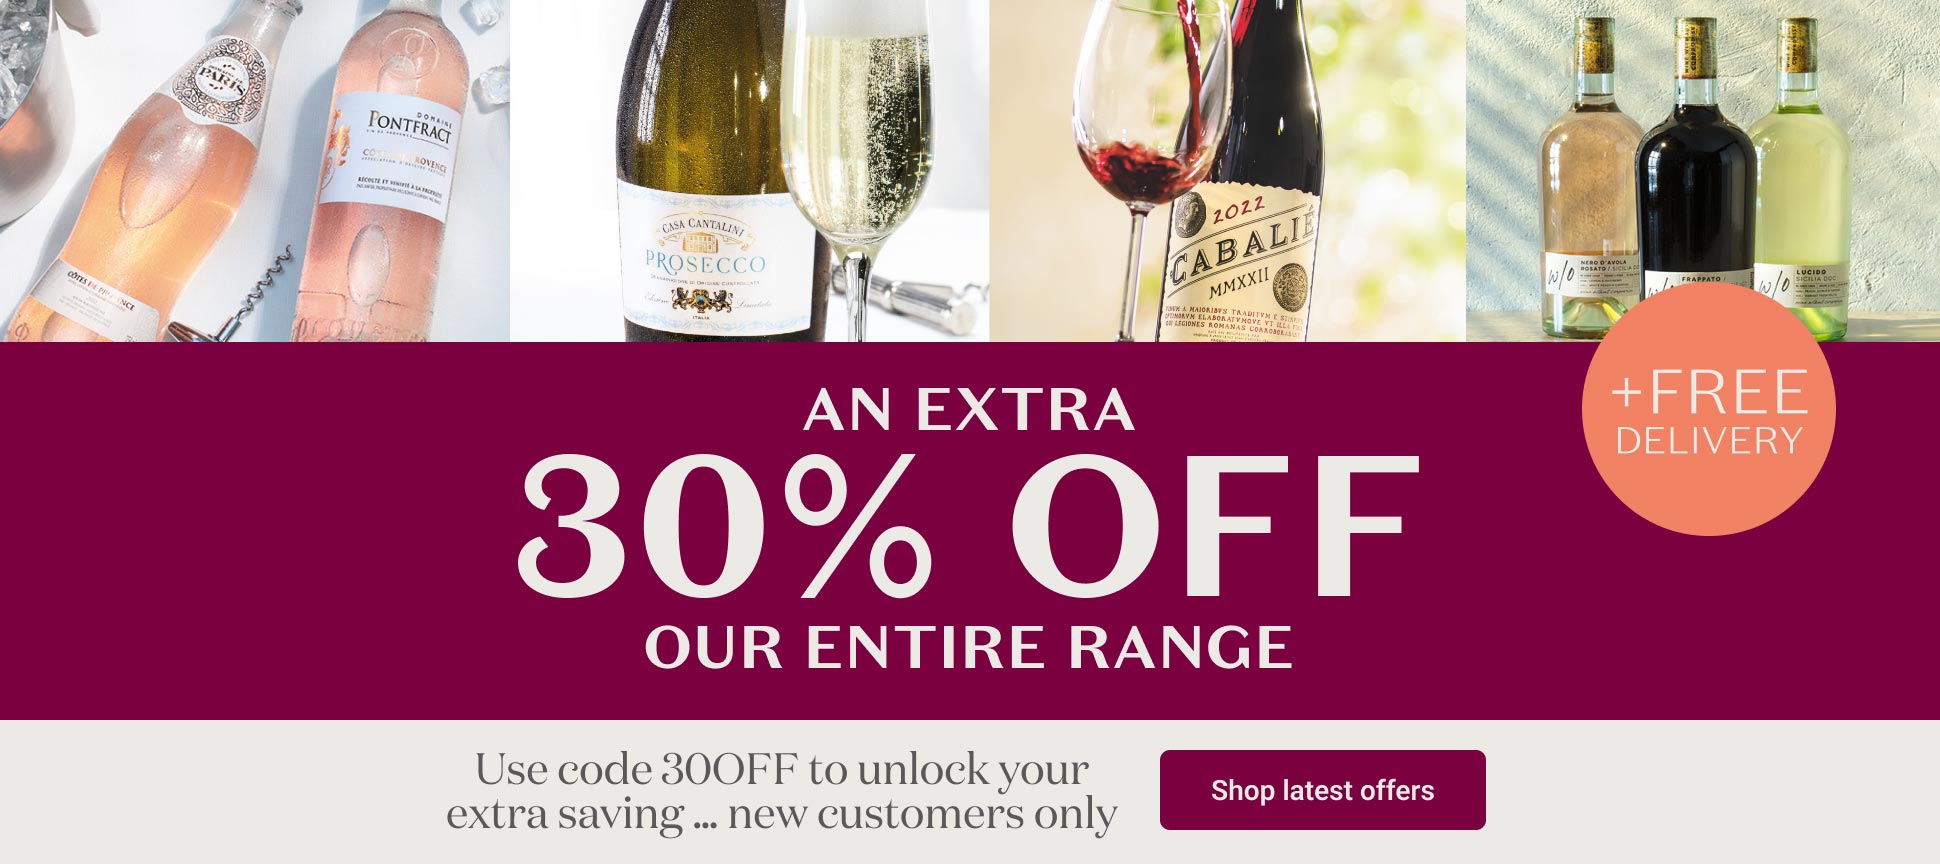 An extra 30% off our entire range